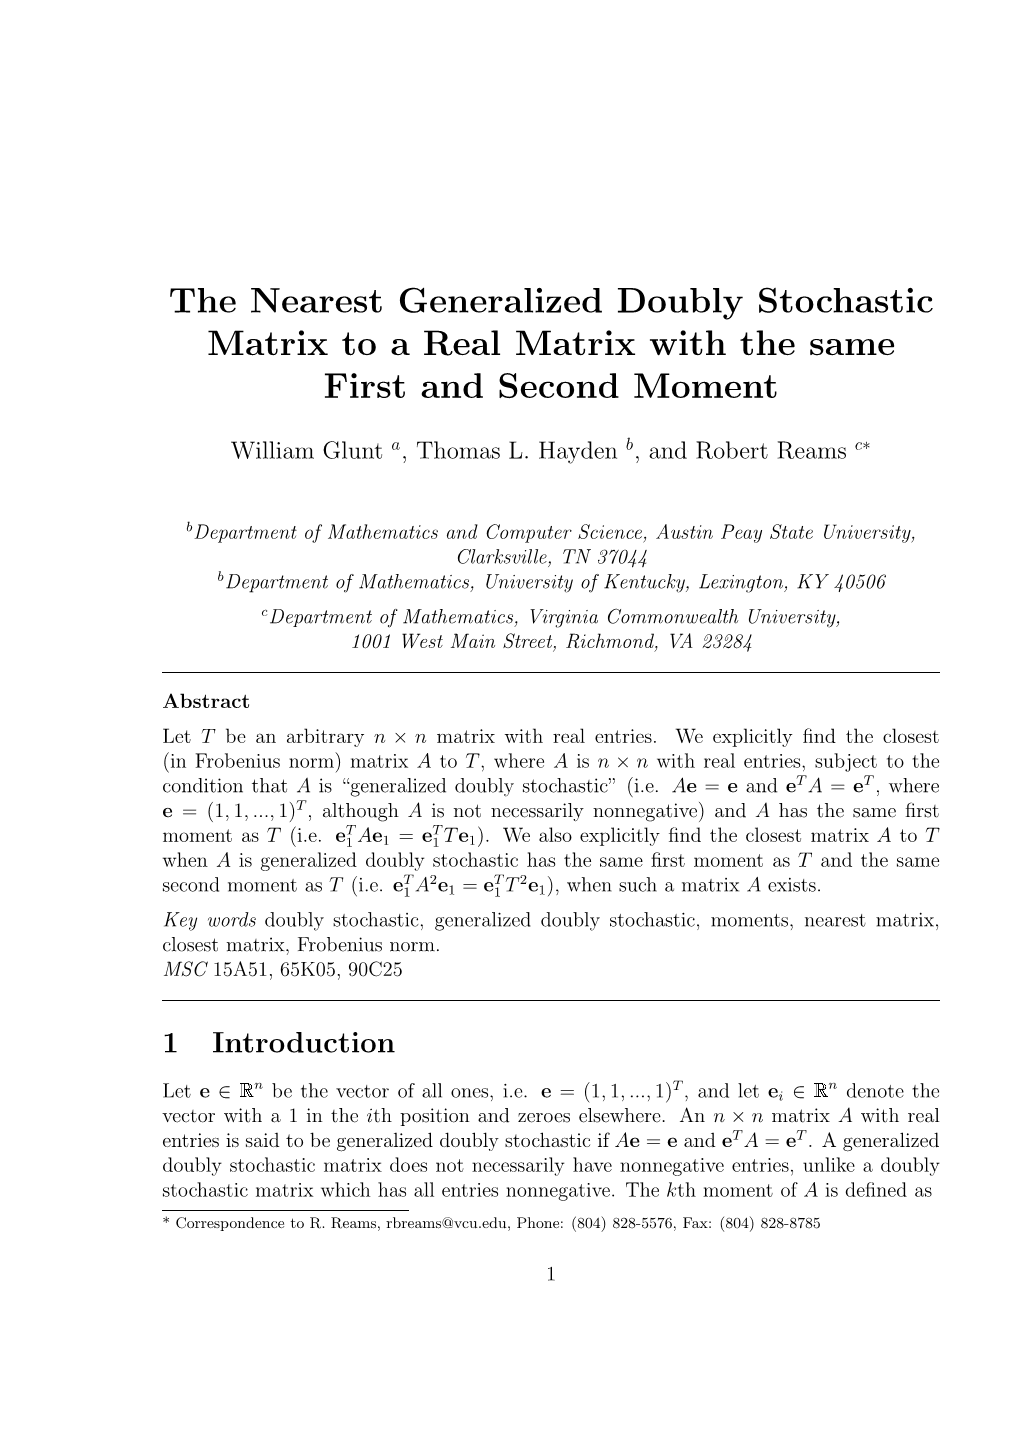 The Nearest Generalized Doubly Stochastic Matrix to a Real Matrix with the Same First and Second Moment